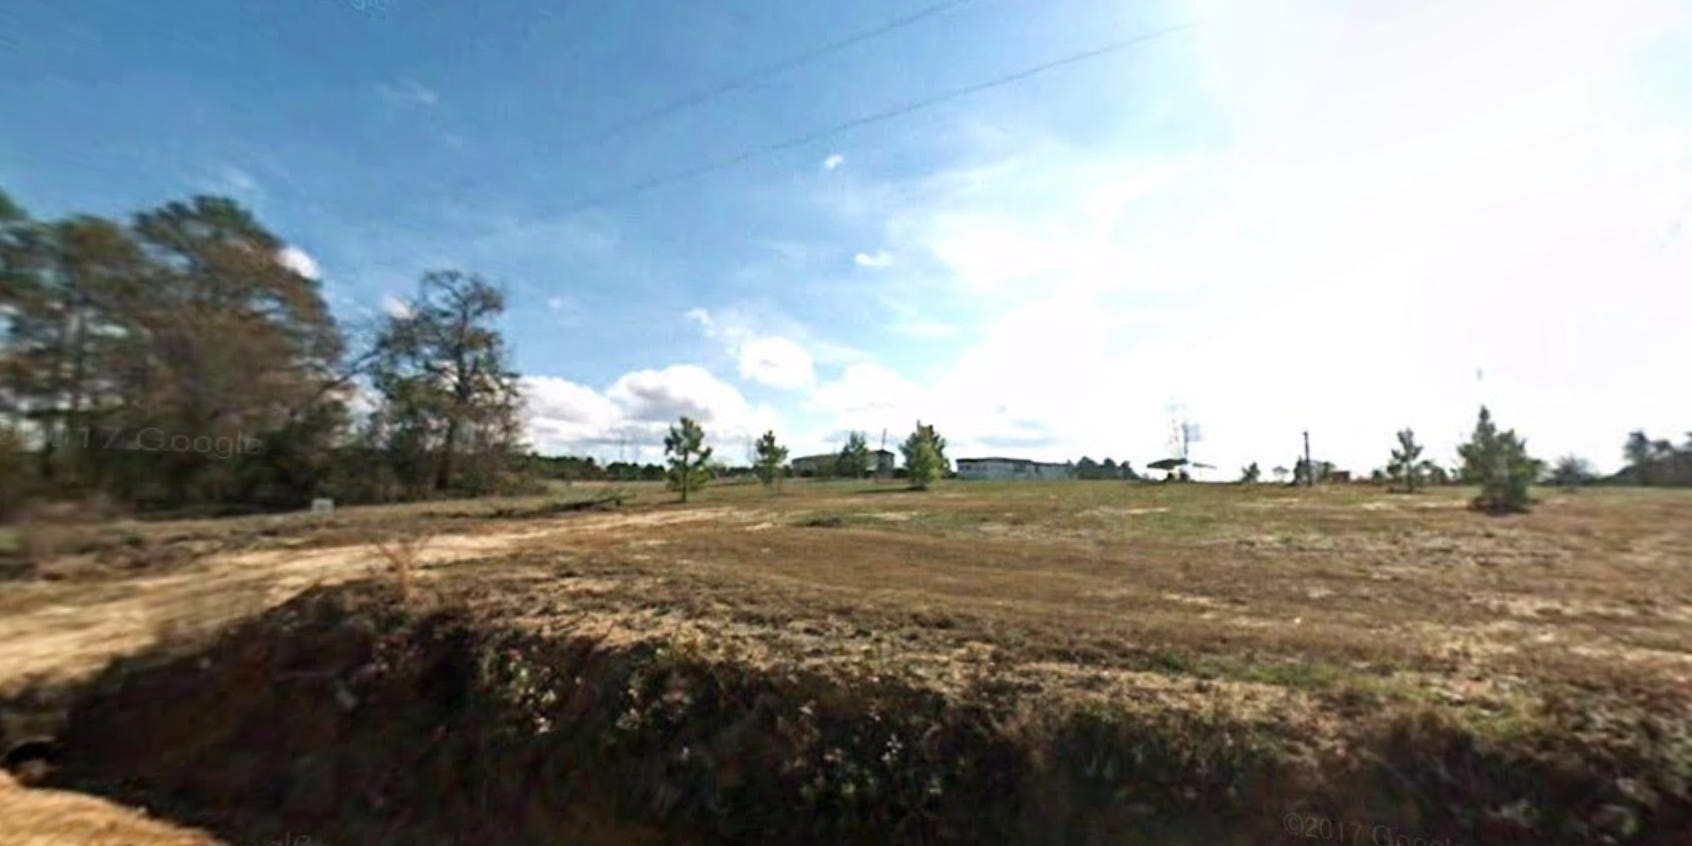 A Google Maps screenshot of Tanglewood Drive in Trenton, South Carolina, where police said the man and woman were found.